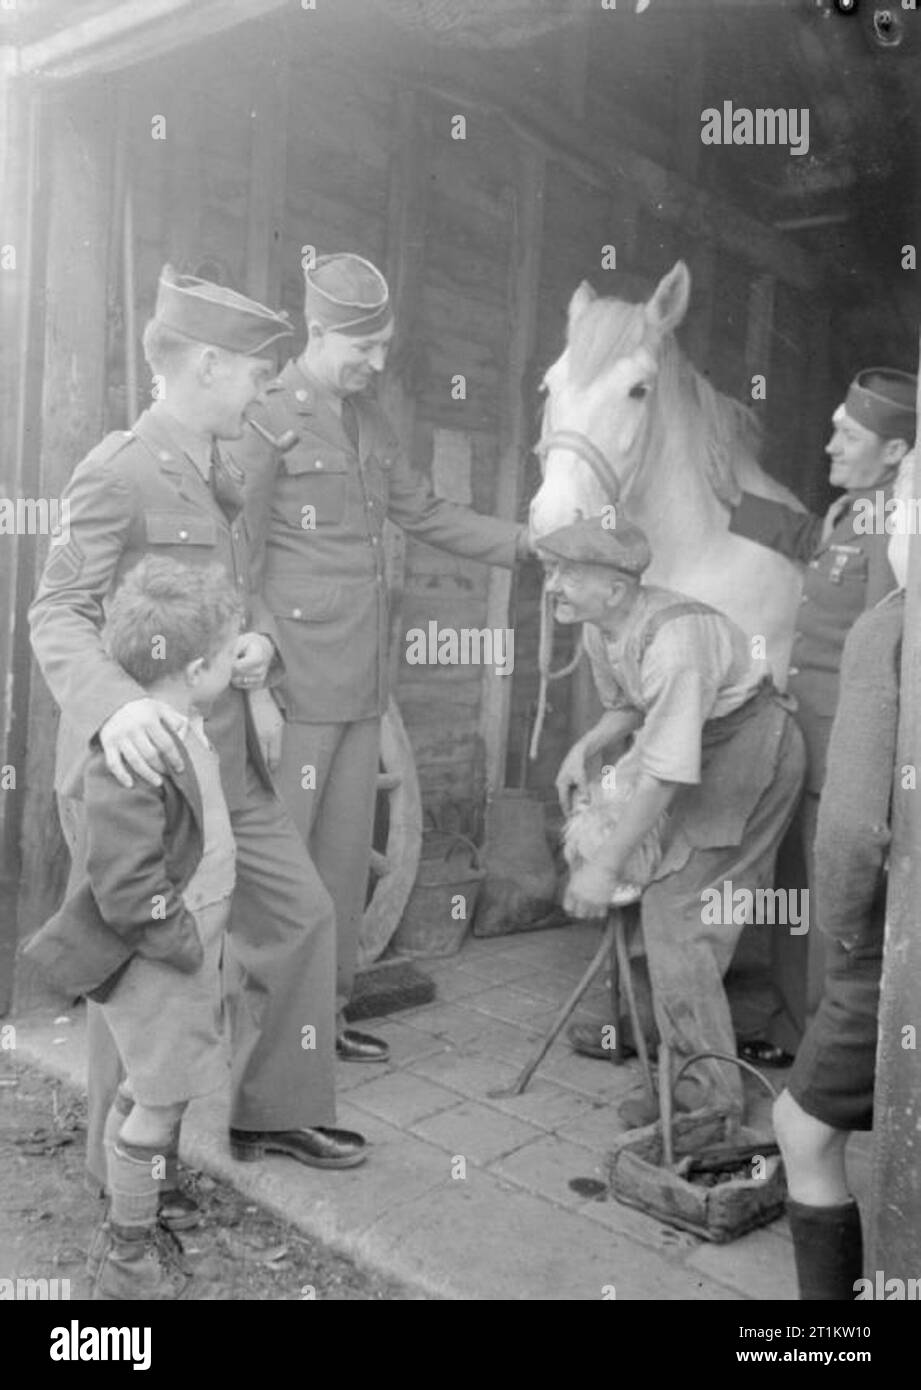 US Troops in An English Village- Everyday Life With the Americans in Burton Bradstock, Dorset, England, UK, 1944 At the blacksmith's shop in Burton Bradstock, Dorset, Sergeant R J Baier (left, smoking pipe, of 125 Park Avenue, Canandaigna, New York), Corporal David Roberts (of RR4 Albia, Iowa), more of their American GI colleagues and a local boy look on as blacksmith R Burton finishes shoeing a horse. According to the original caption, 'they have come to beg horseshoes for a game at the camp'. Stock Photo